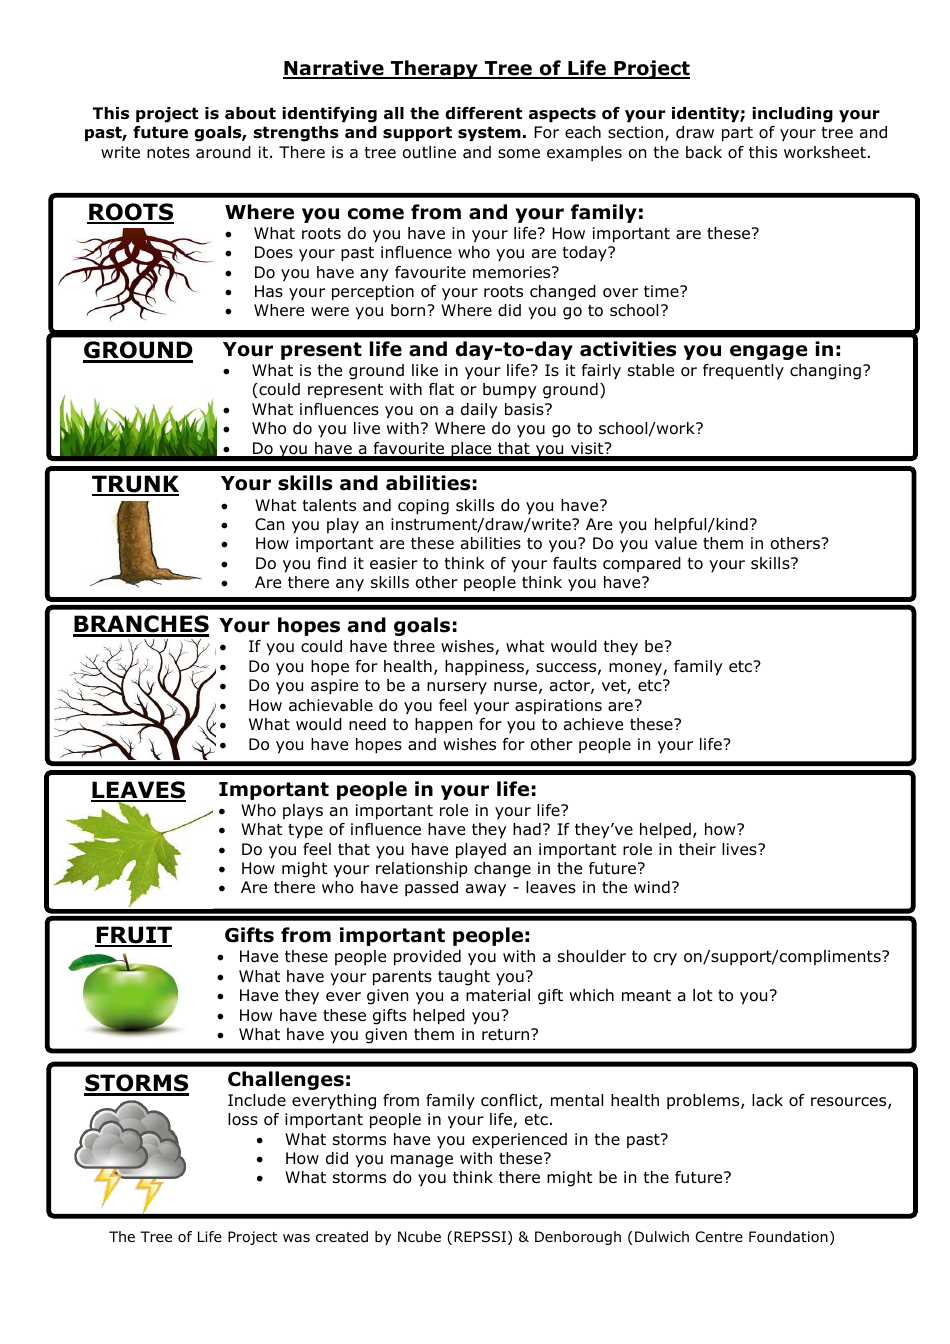 Narrative Therapy Tree of Life Project Template - Download and Customize